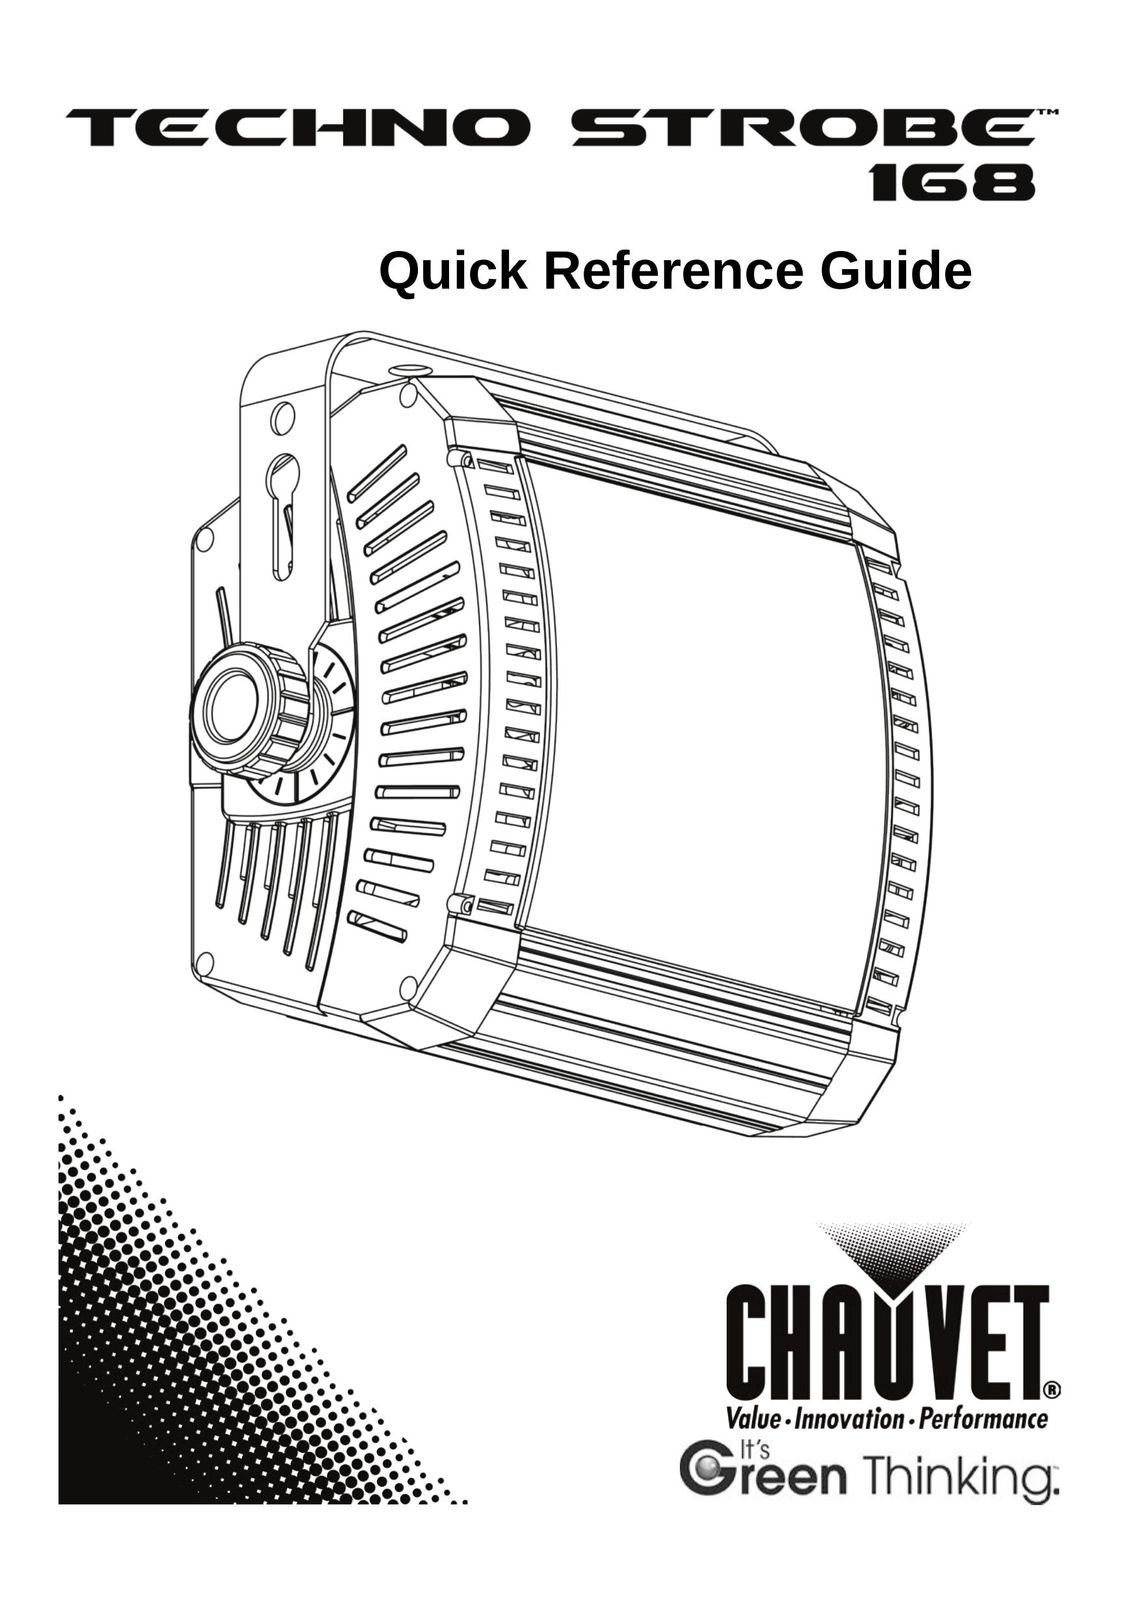 Chauvet 168 Stroller User Manual (Page 1)